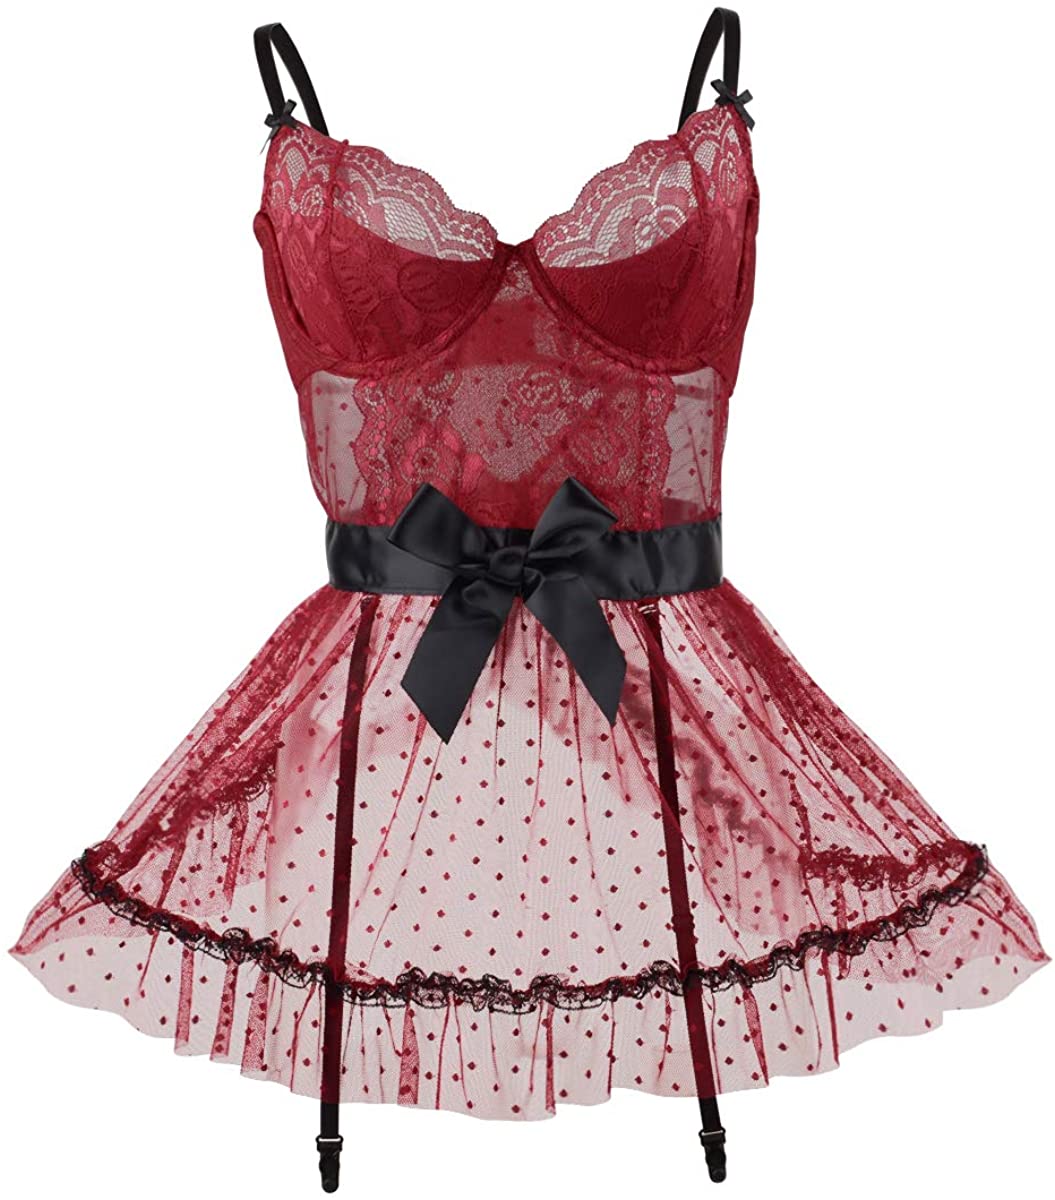 LINGERLOVE Women Plus Size Sexy Lingerie Chemise Floral Lace Babydoll See  Through Nightgown S-4XL : : Clothing, Shoes & Accessories